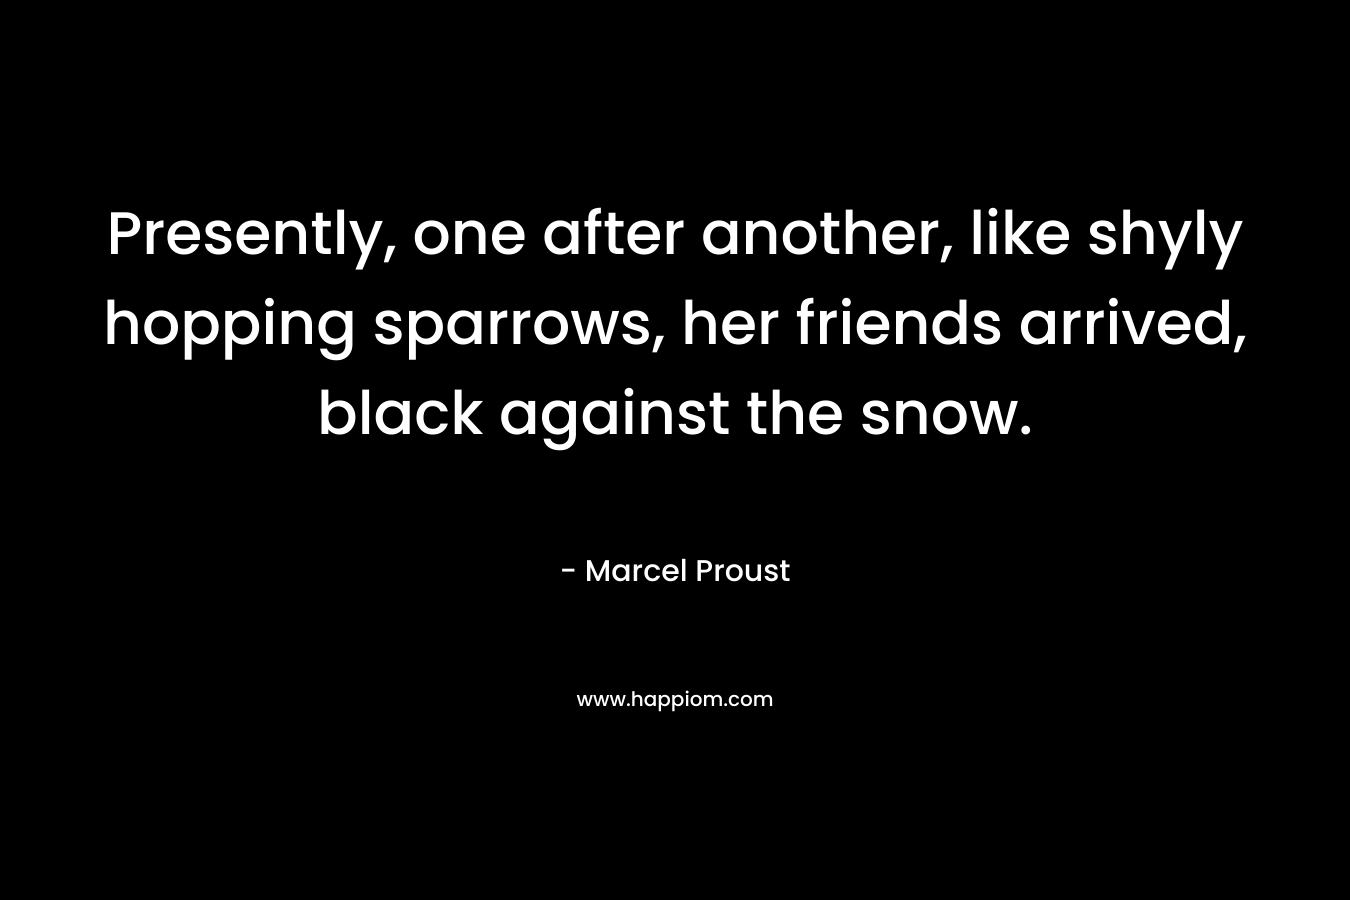 Presently, one after another, like shyly hopping sparrows, her friends arrived, black against the snow.